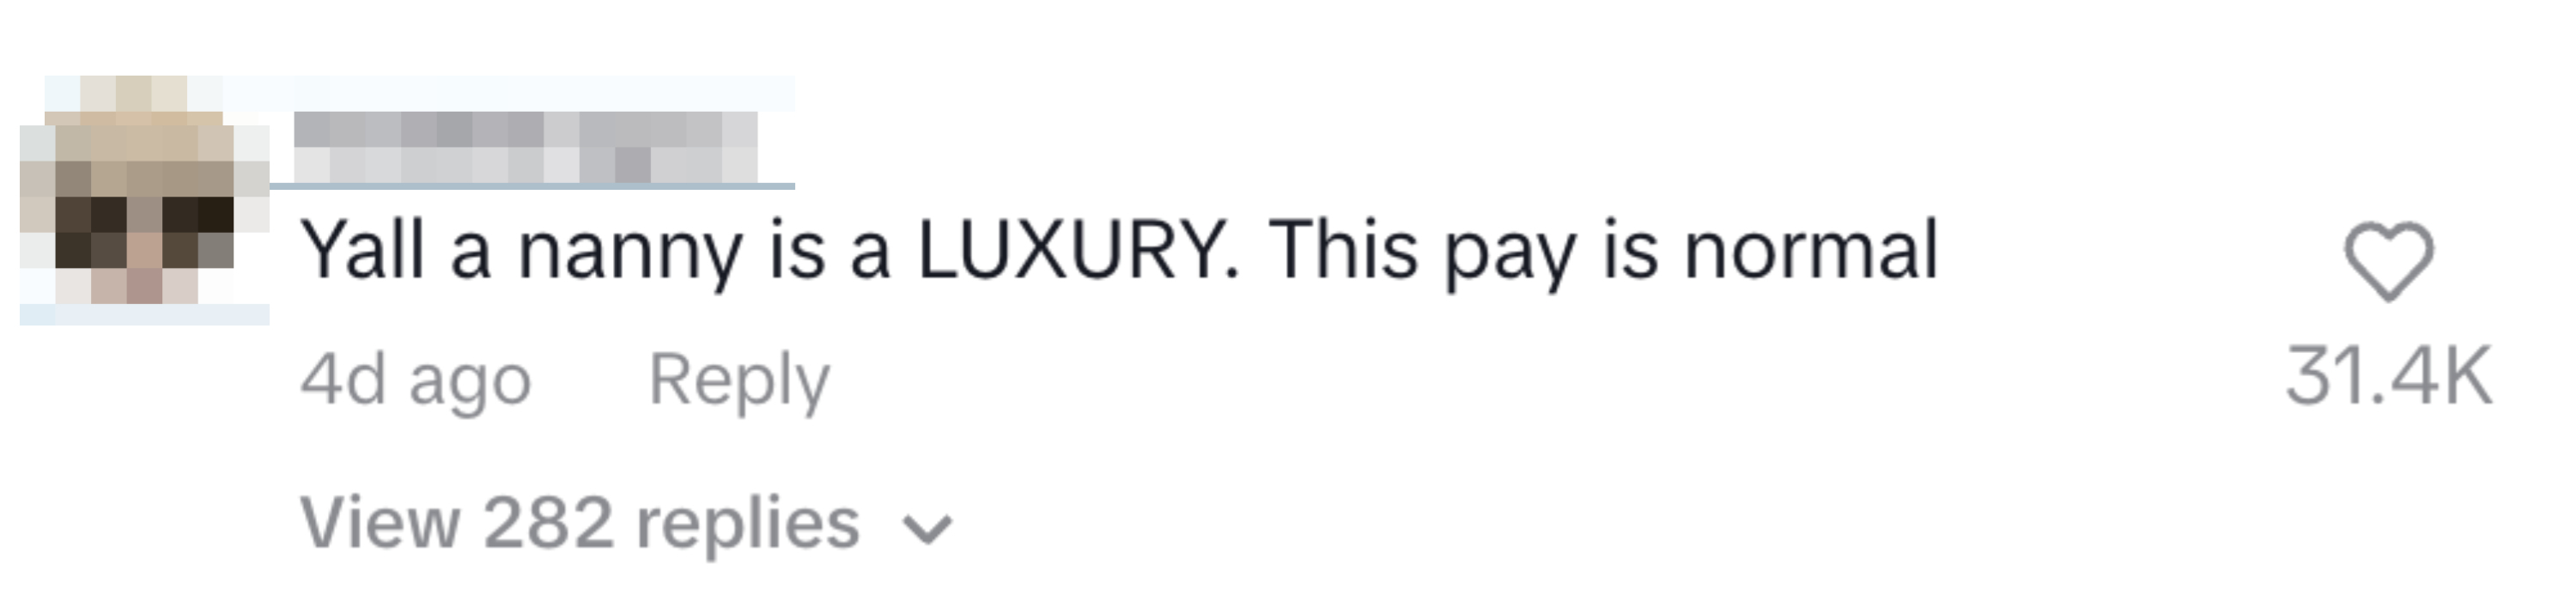 Instagram comment stating that having a nanny is a luxury and the payment is normal, with 53.4K likes